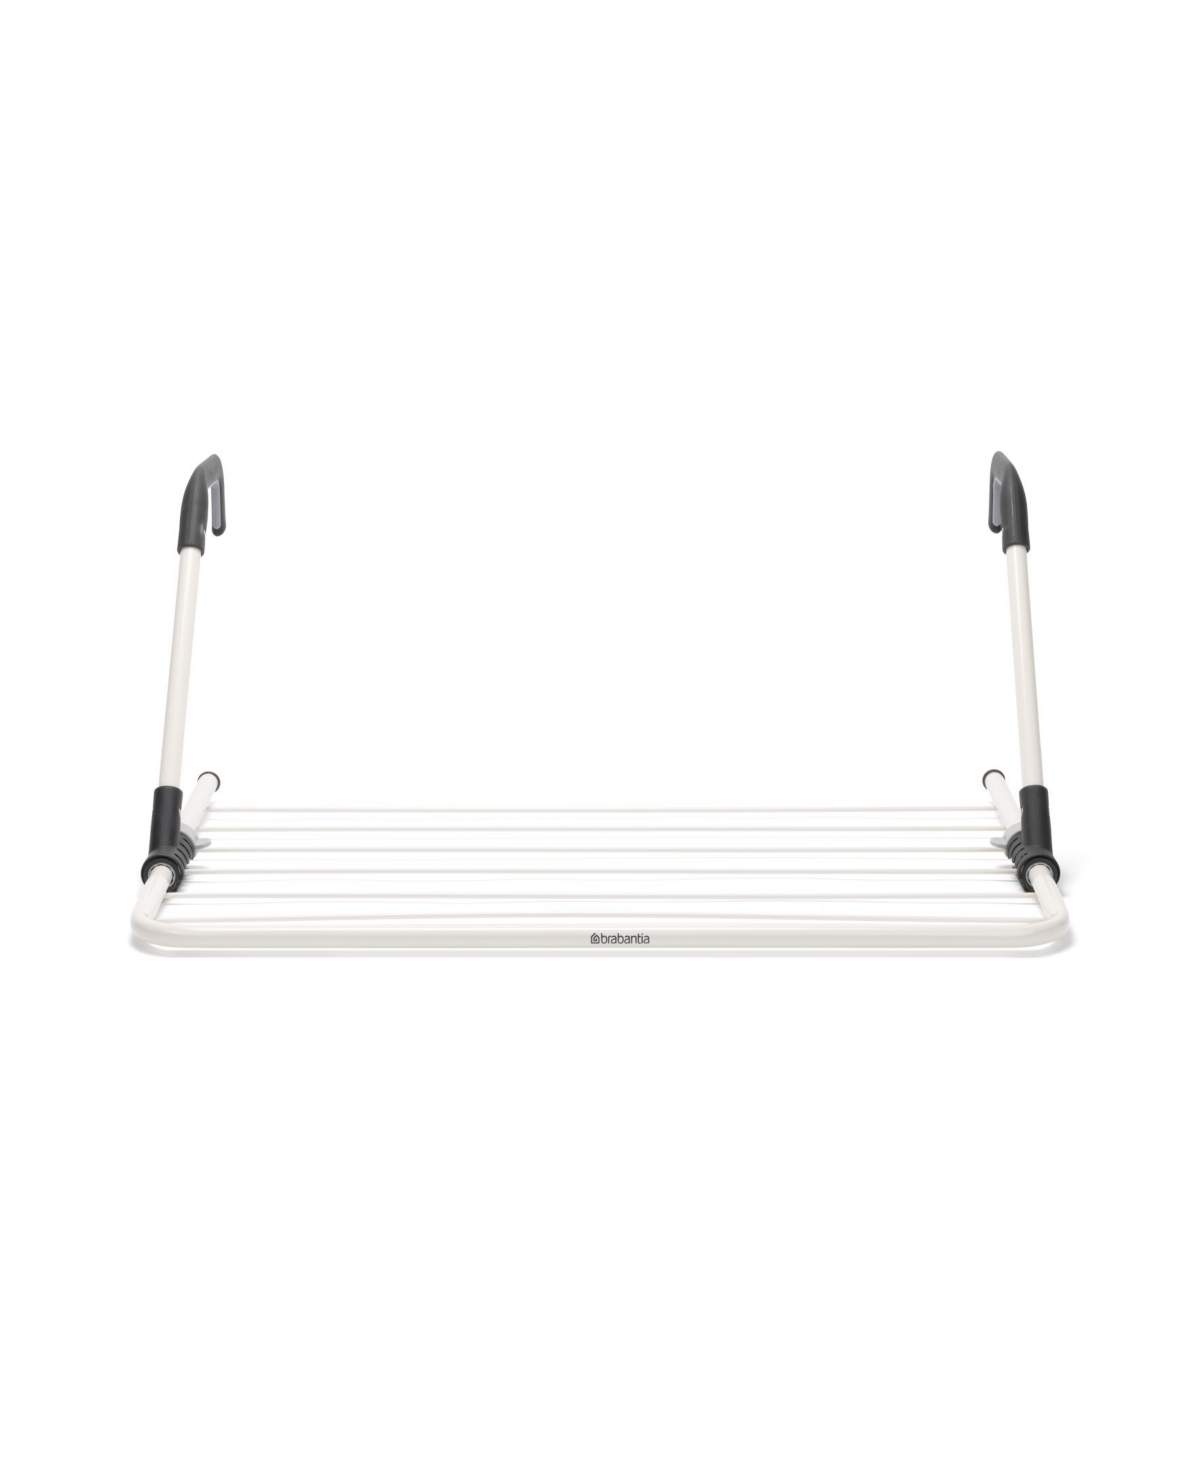 Radiator Clothes Drying Rack, 15' - White